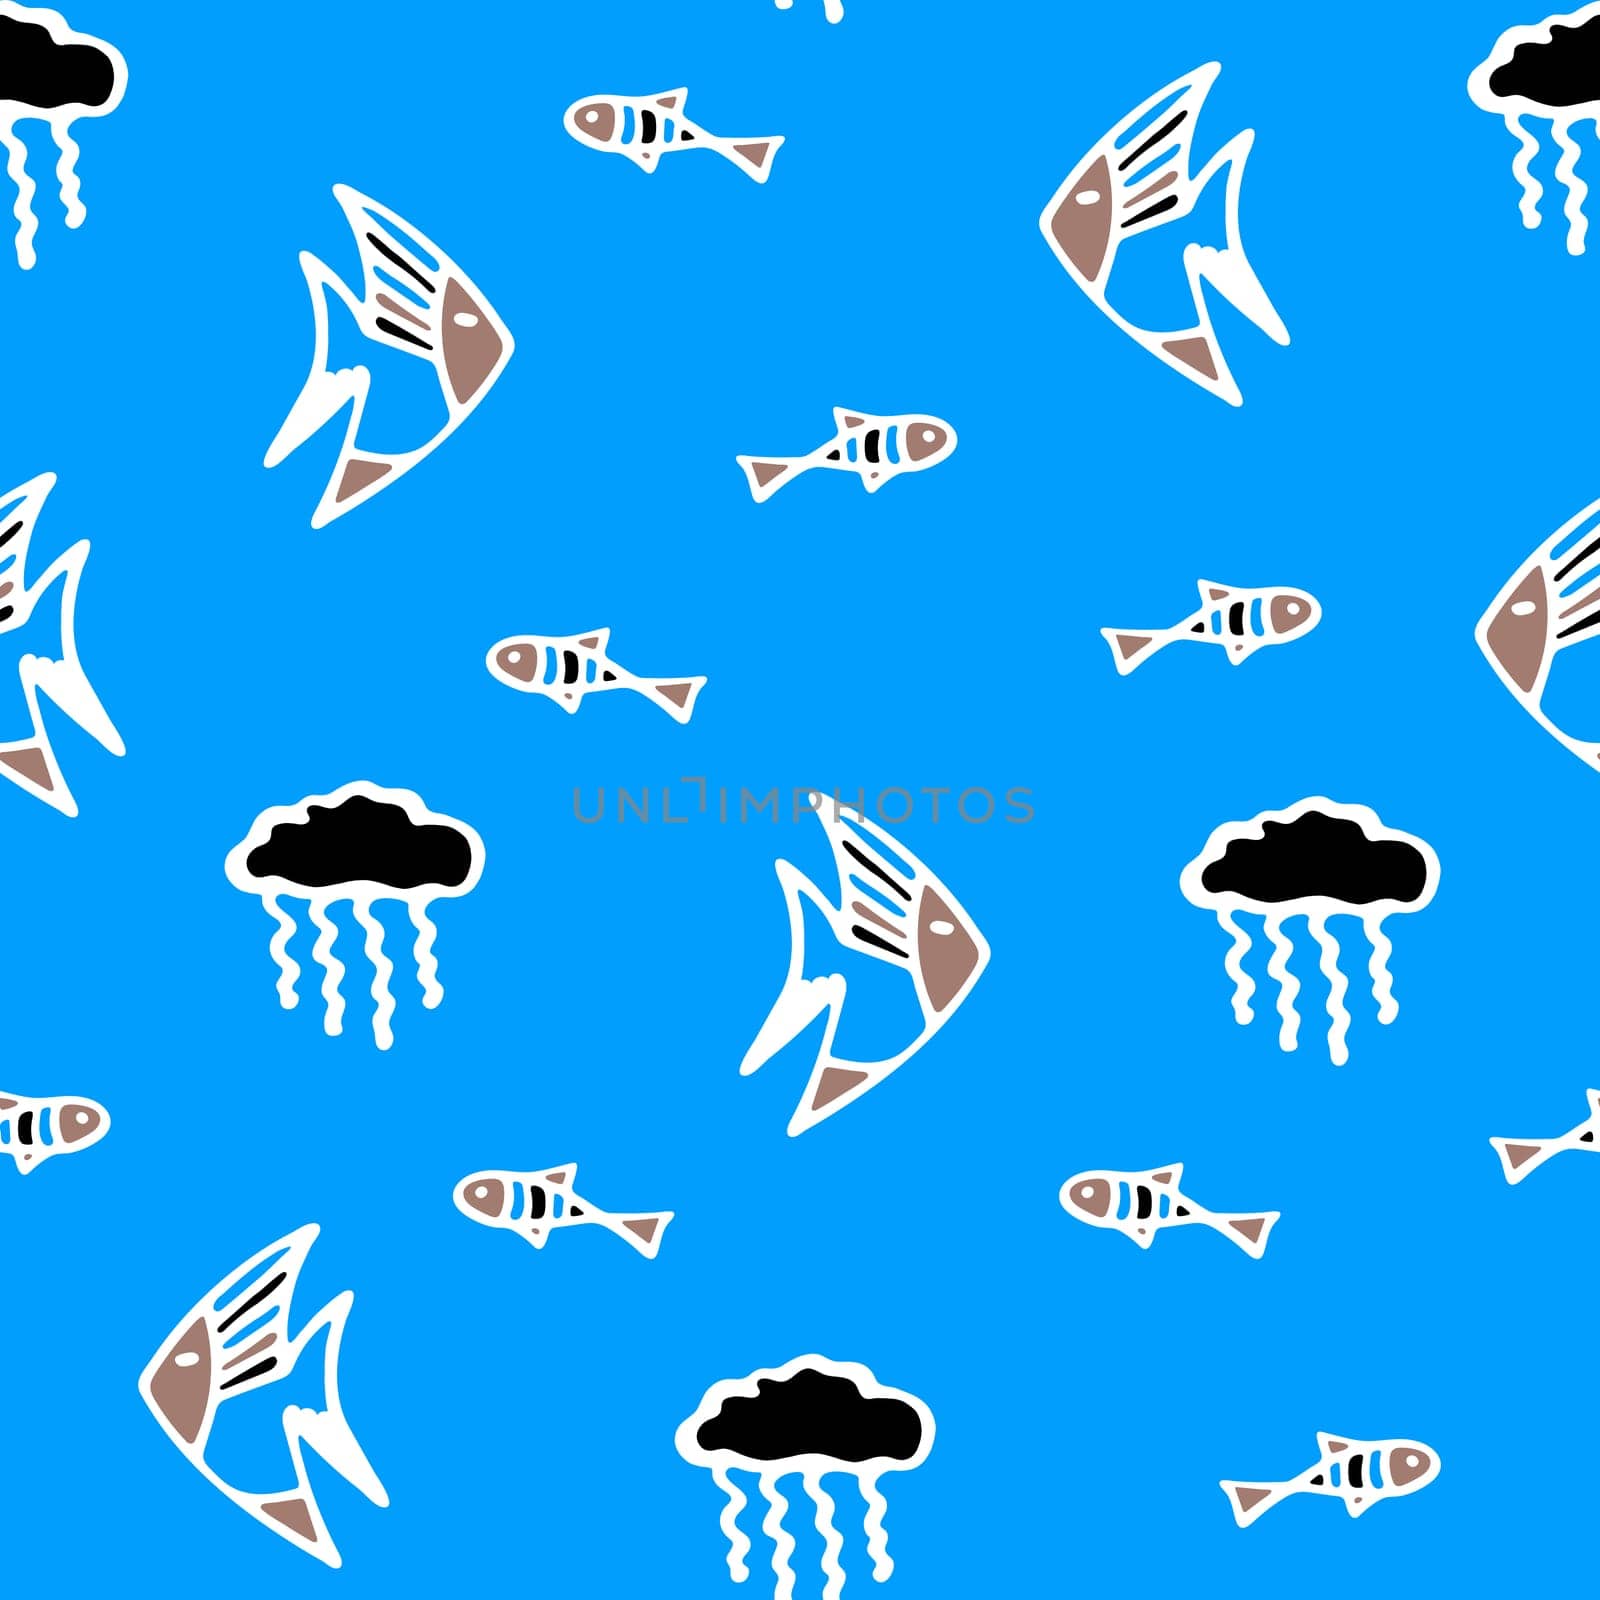 Fish and Jellyfish Seamless Pattern. Background for Kids with Hand drawn Doodle Cute Fish and Jelly Fish. Cartoon Sea Animals illustration. Underwater World Digital Paper on Bkue Background.